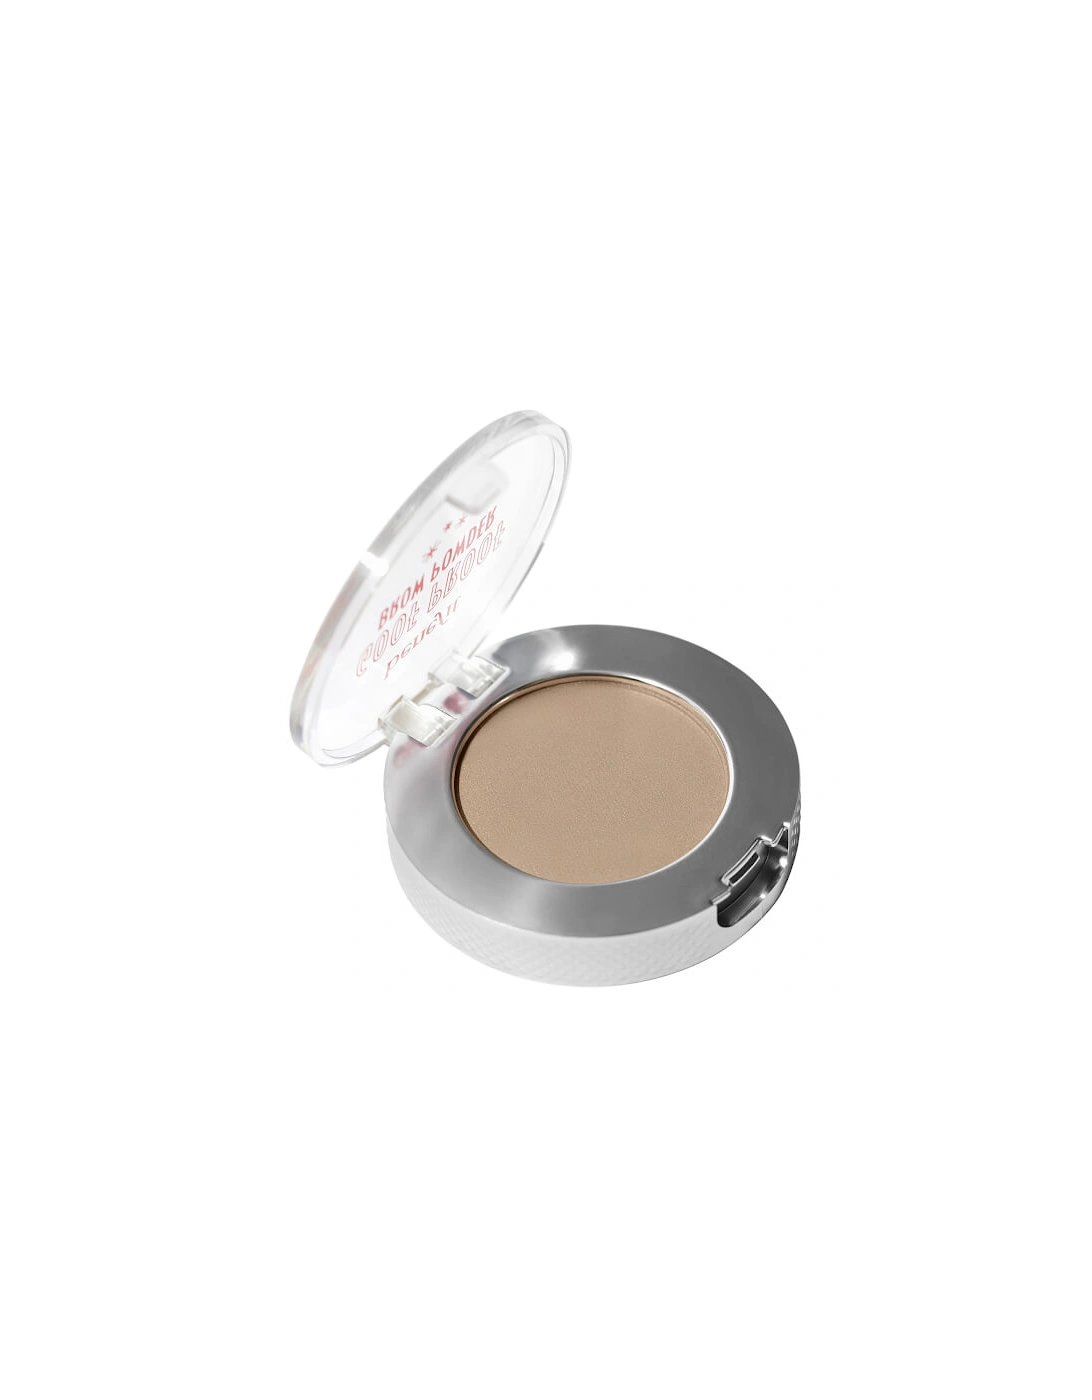 Goof Proof Easy Brow Filling Powder - 01 Cool Light Blonde, 2 of 1